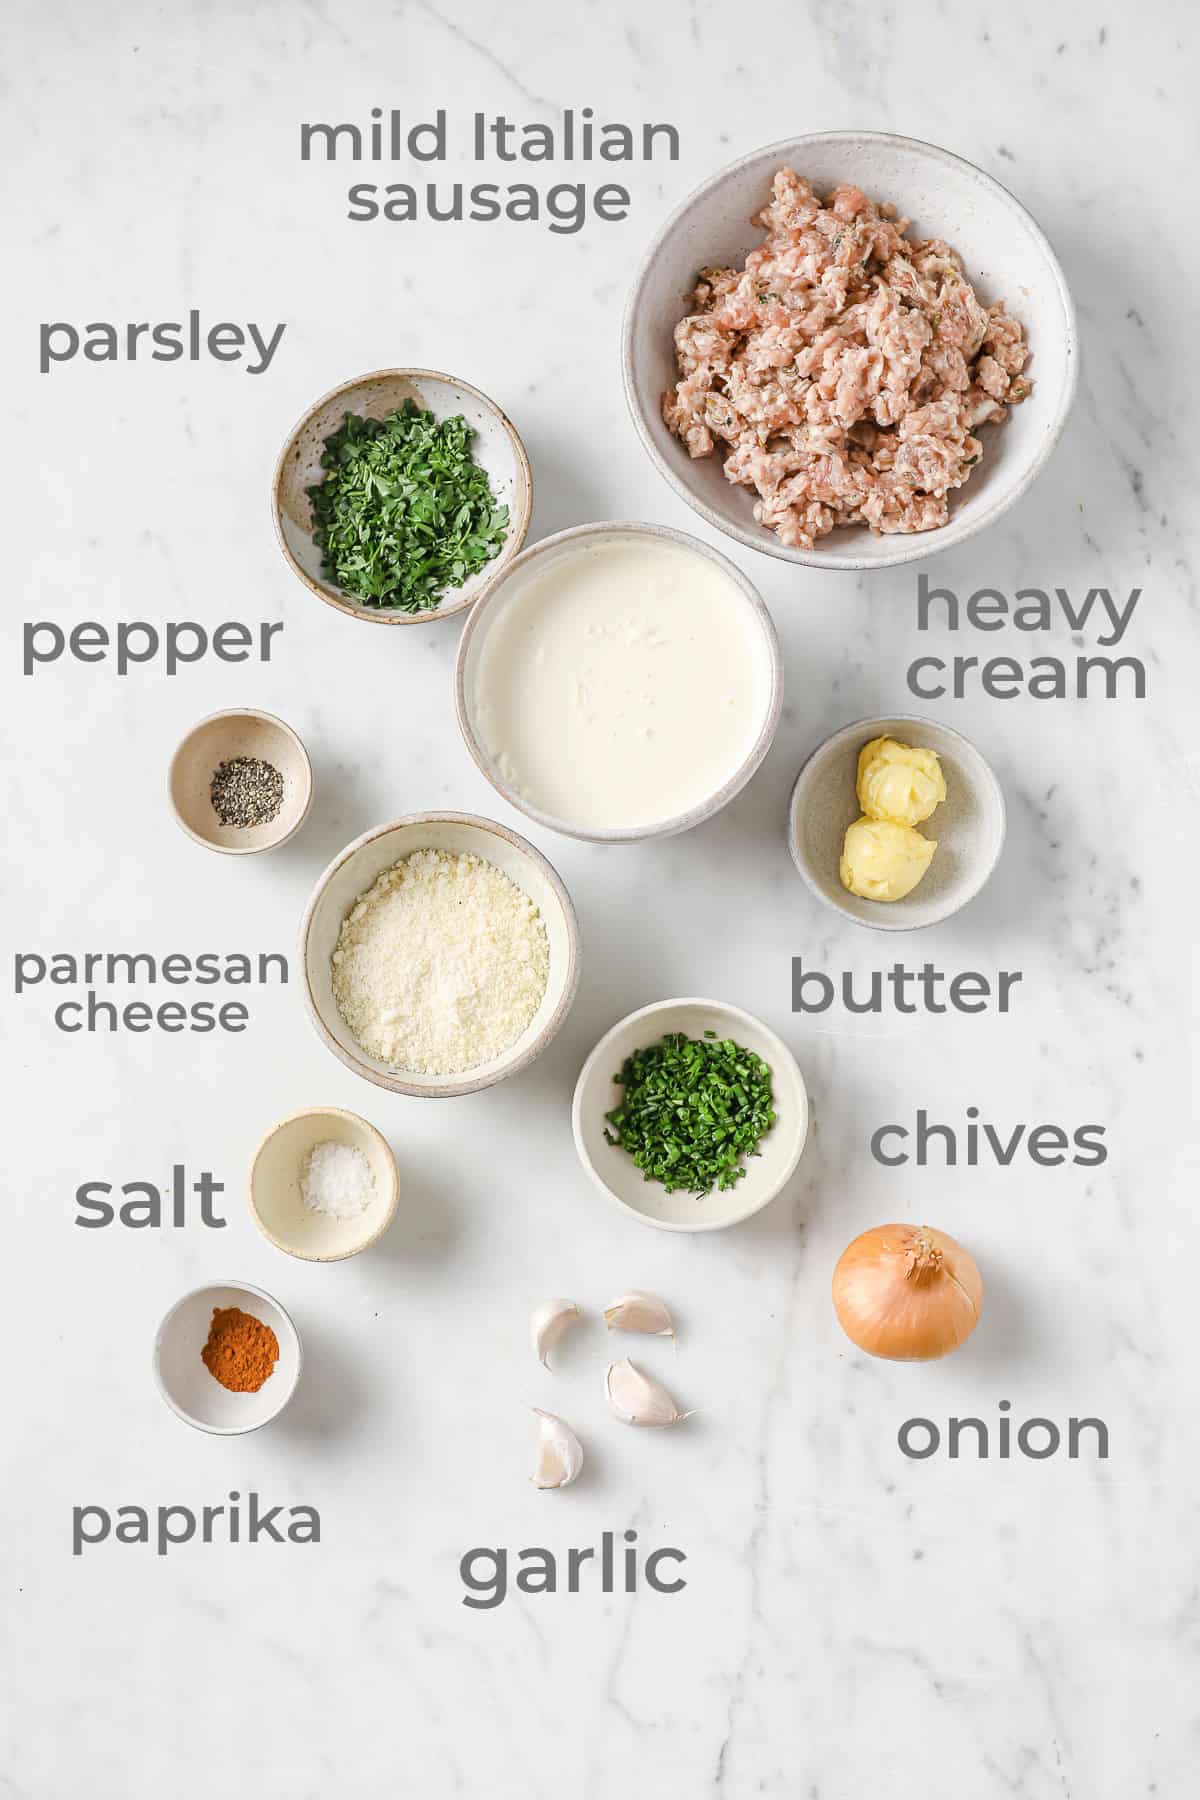 Ingredients all laid out to make sausage gravy - sausage, heavy cream, butter, garlic, herbs, salt, pepper, onion, and parmesan cheese.